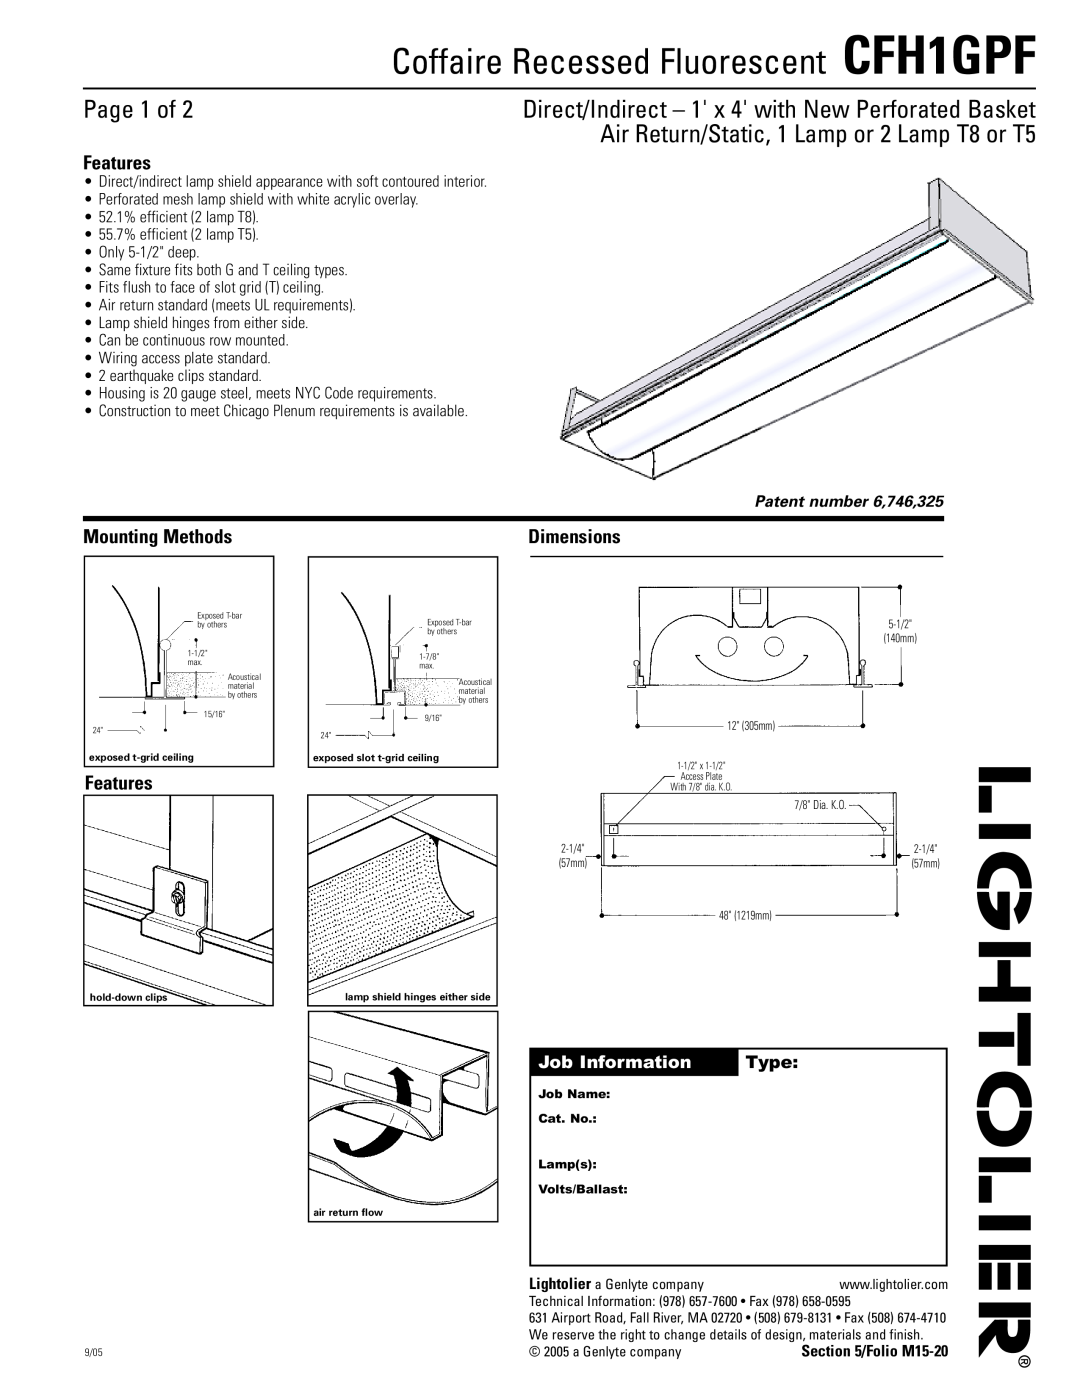 Lightolier dimensions Coffaire Recessed Fluorescent CFH1GPF, Page 1 of, Features, Mounting Methods, Dimensions 